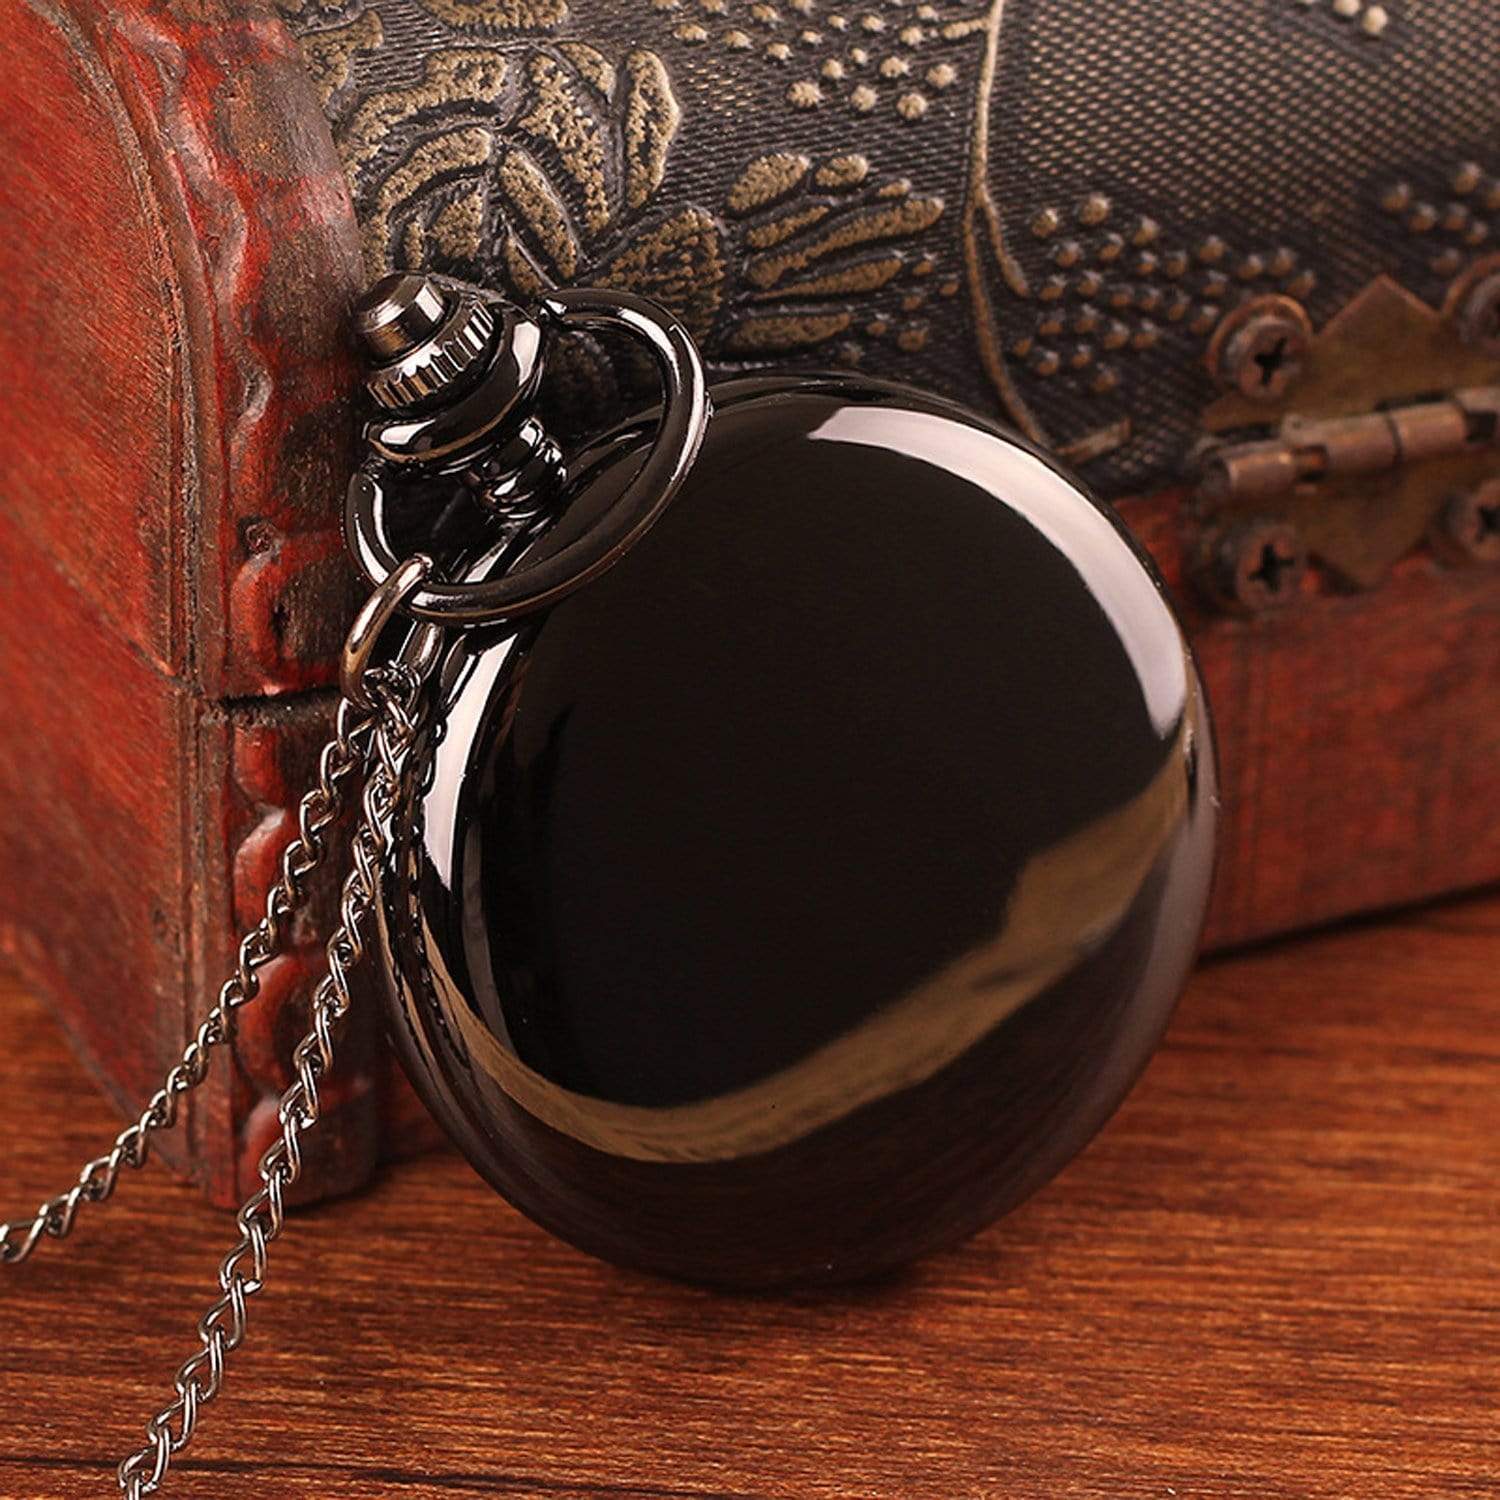 Pocket Watches Dad To Son - This Old Lion Will Always Have Your Back Pocket Watch GiveMe-Gifts